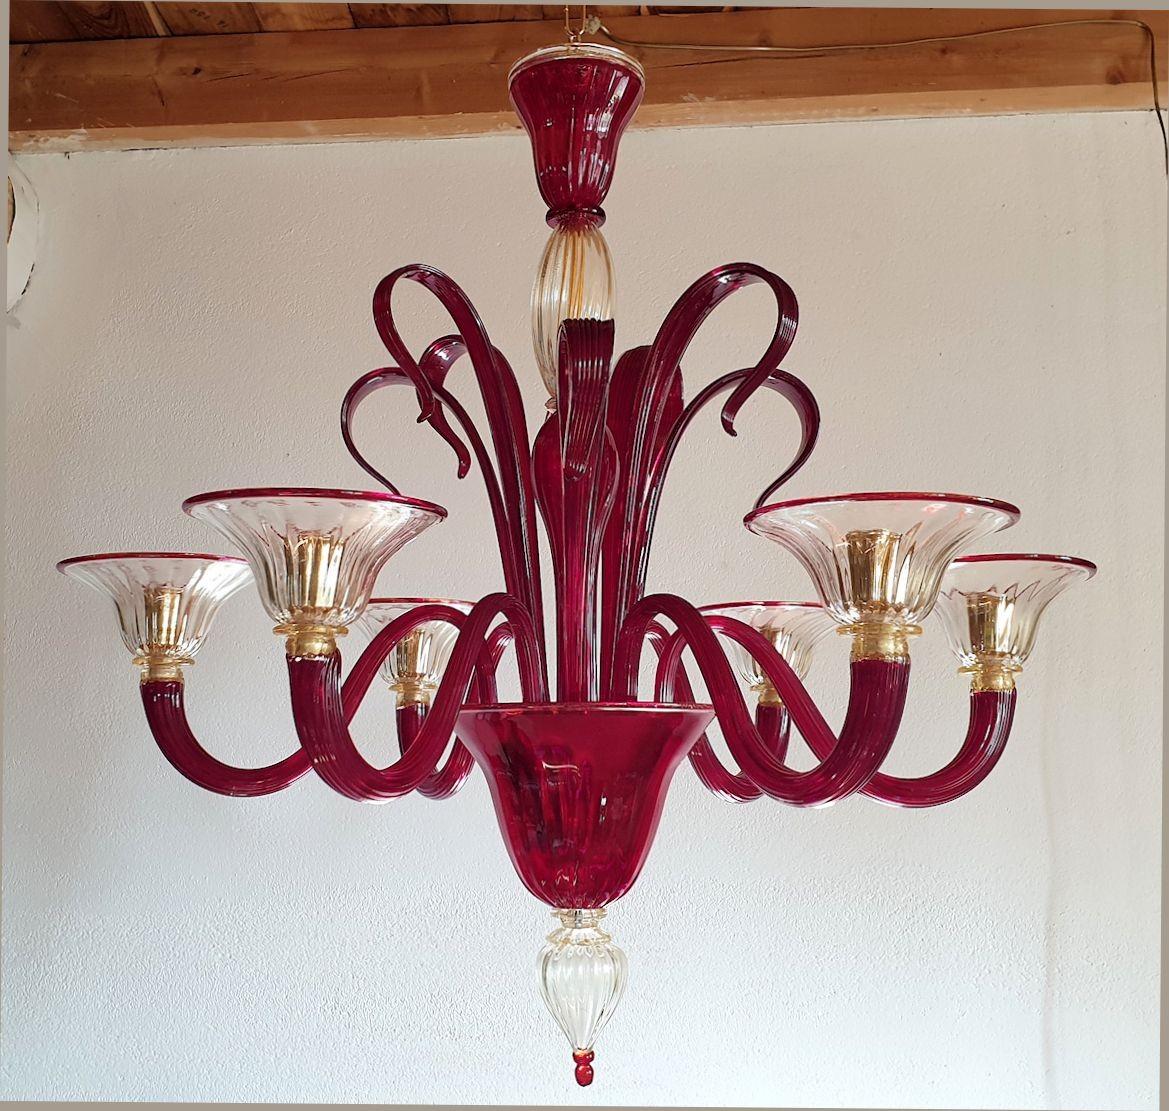 Large red and gold Murano glass chandelier, Mid-Century Modern, attributed to Venini, Italy 1960s
A classical, or neoclassical Murano glass vintage chandelier.
The red chandelier has a double canopy and a brass chain, making the height